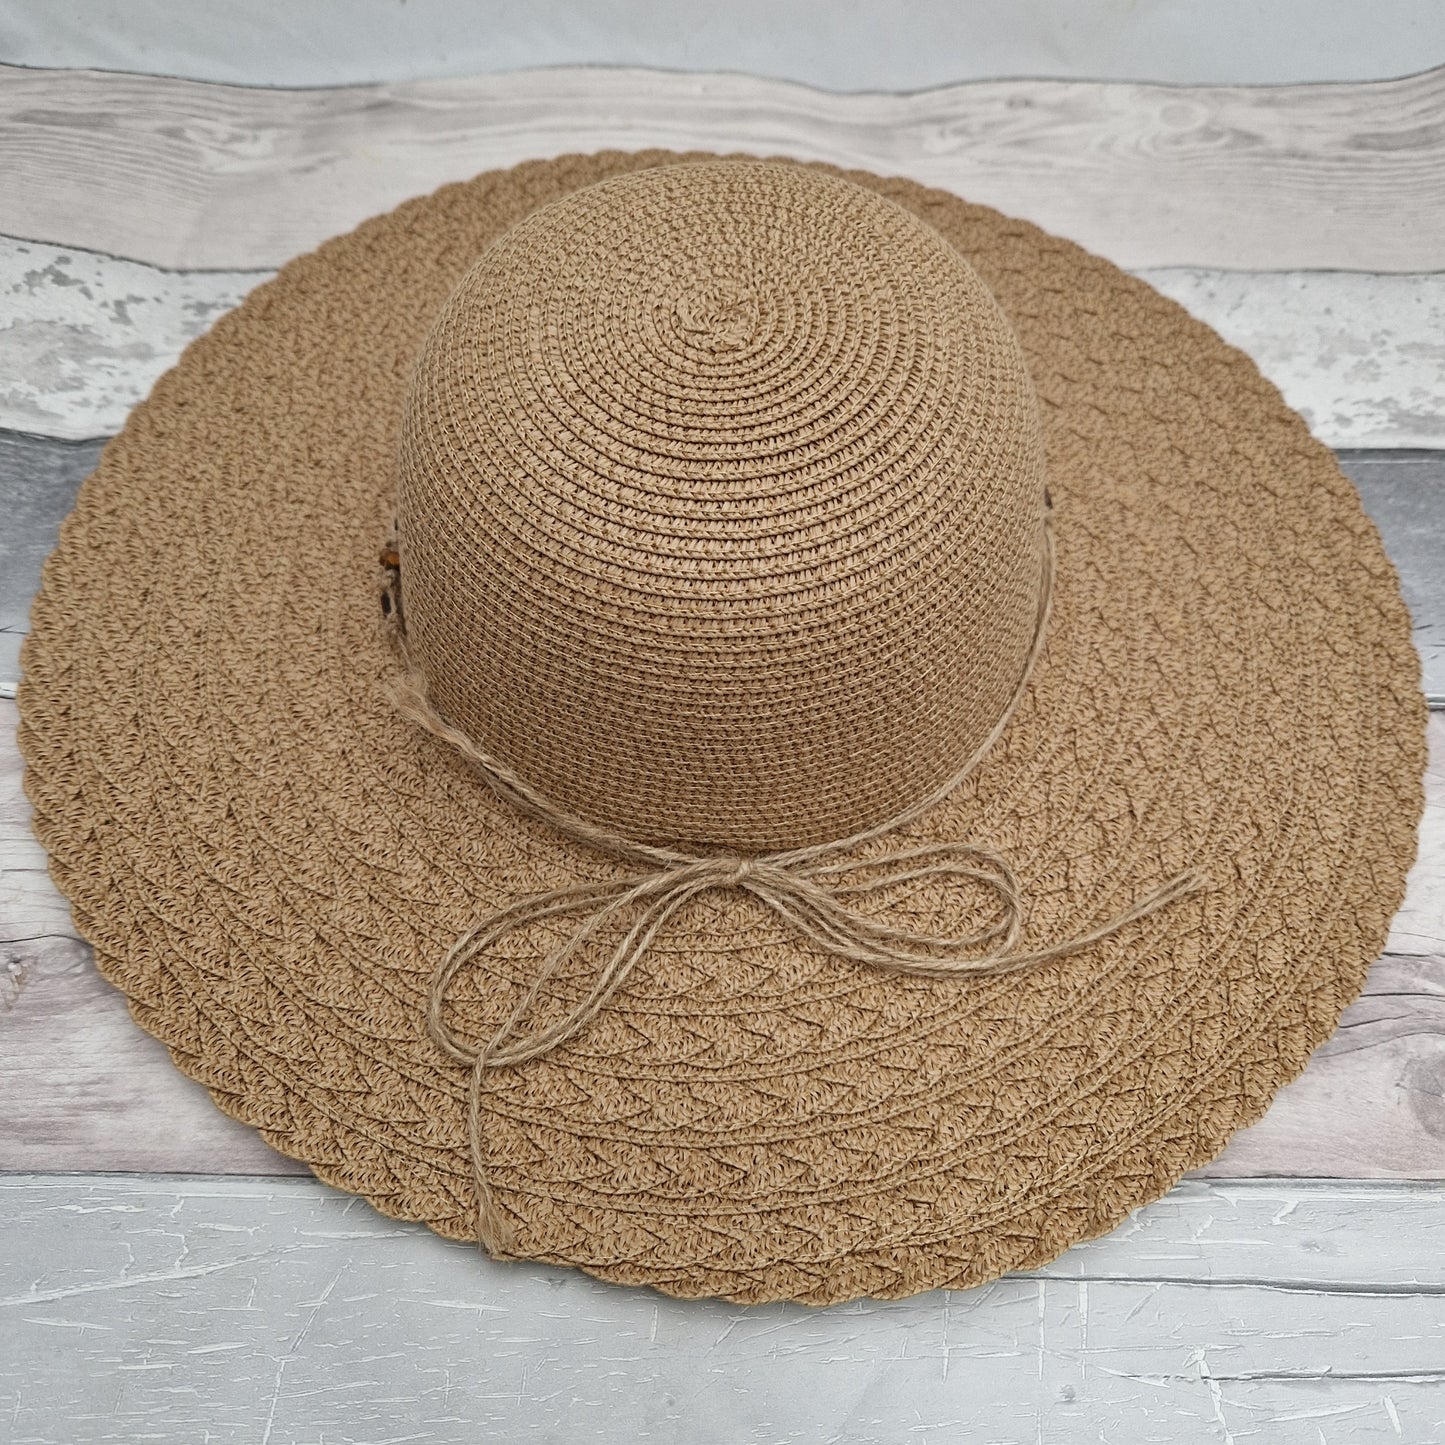 Natural coloured wide brimmed hat with a beaded band.